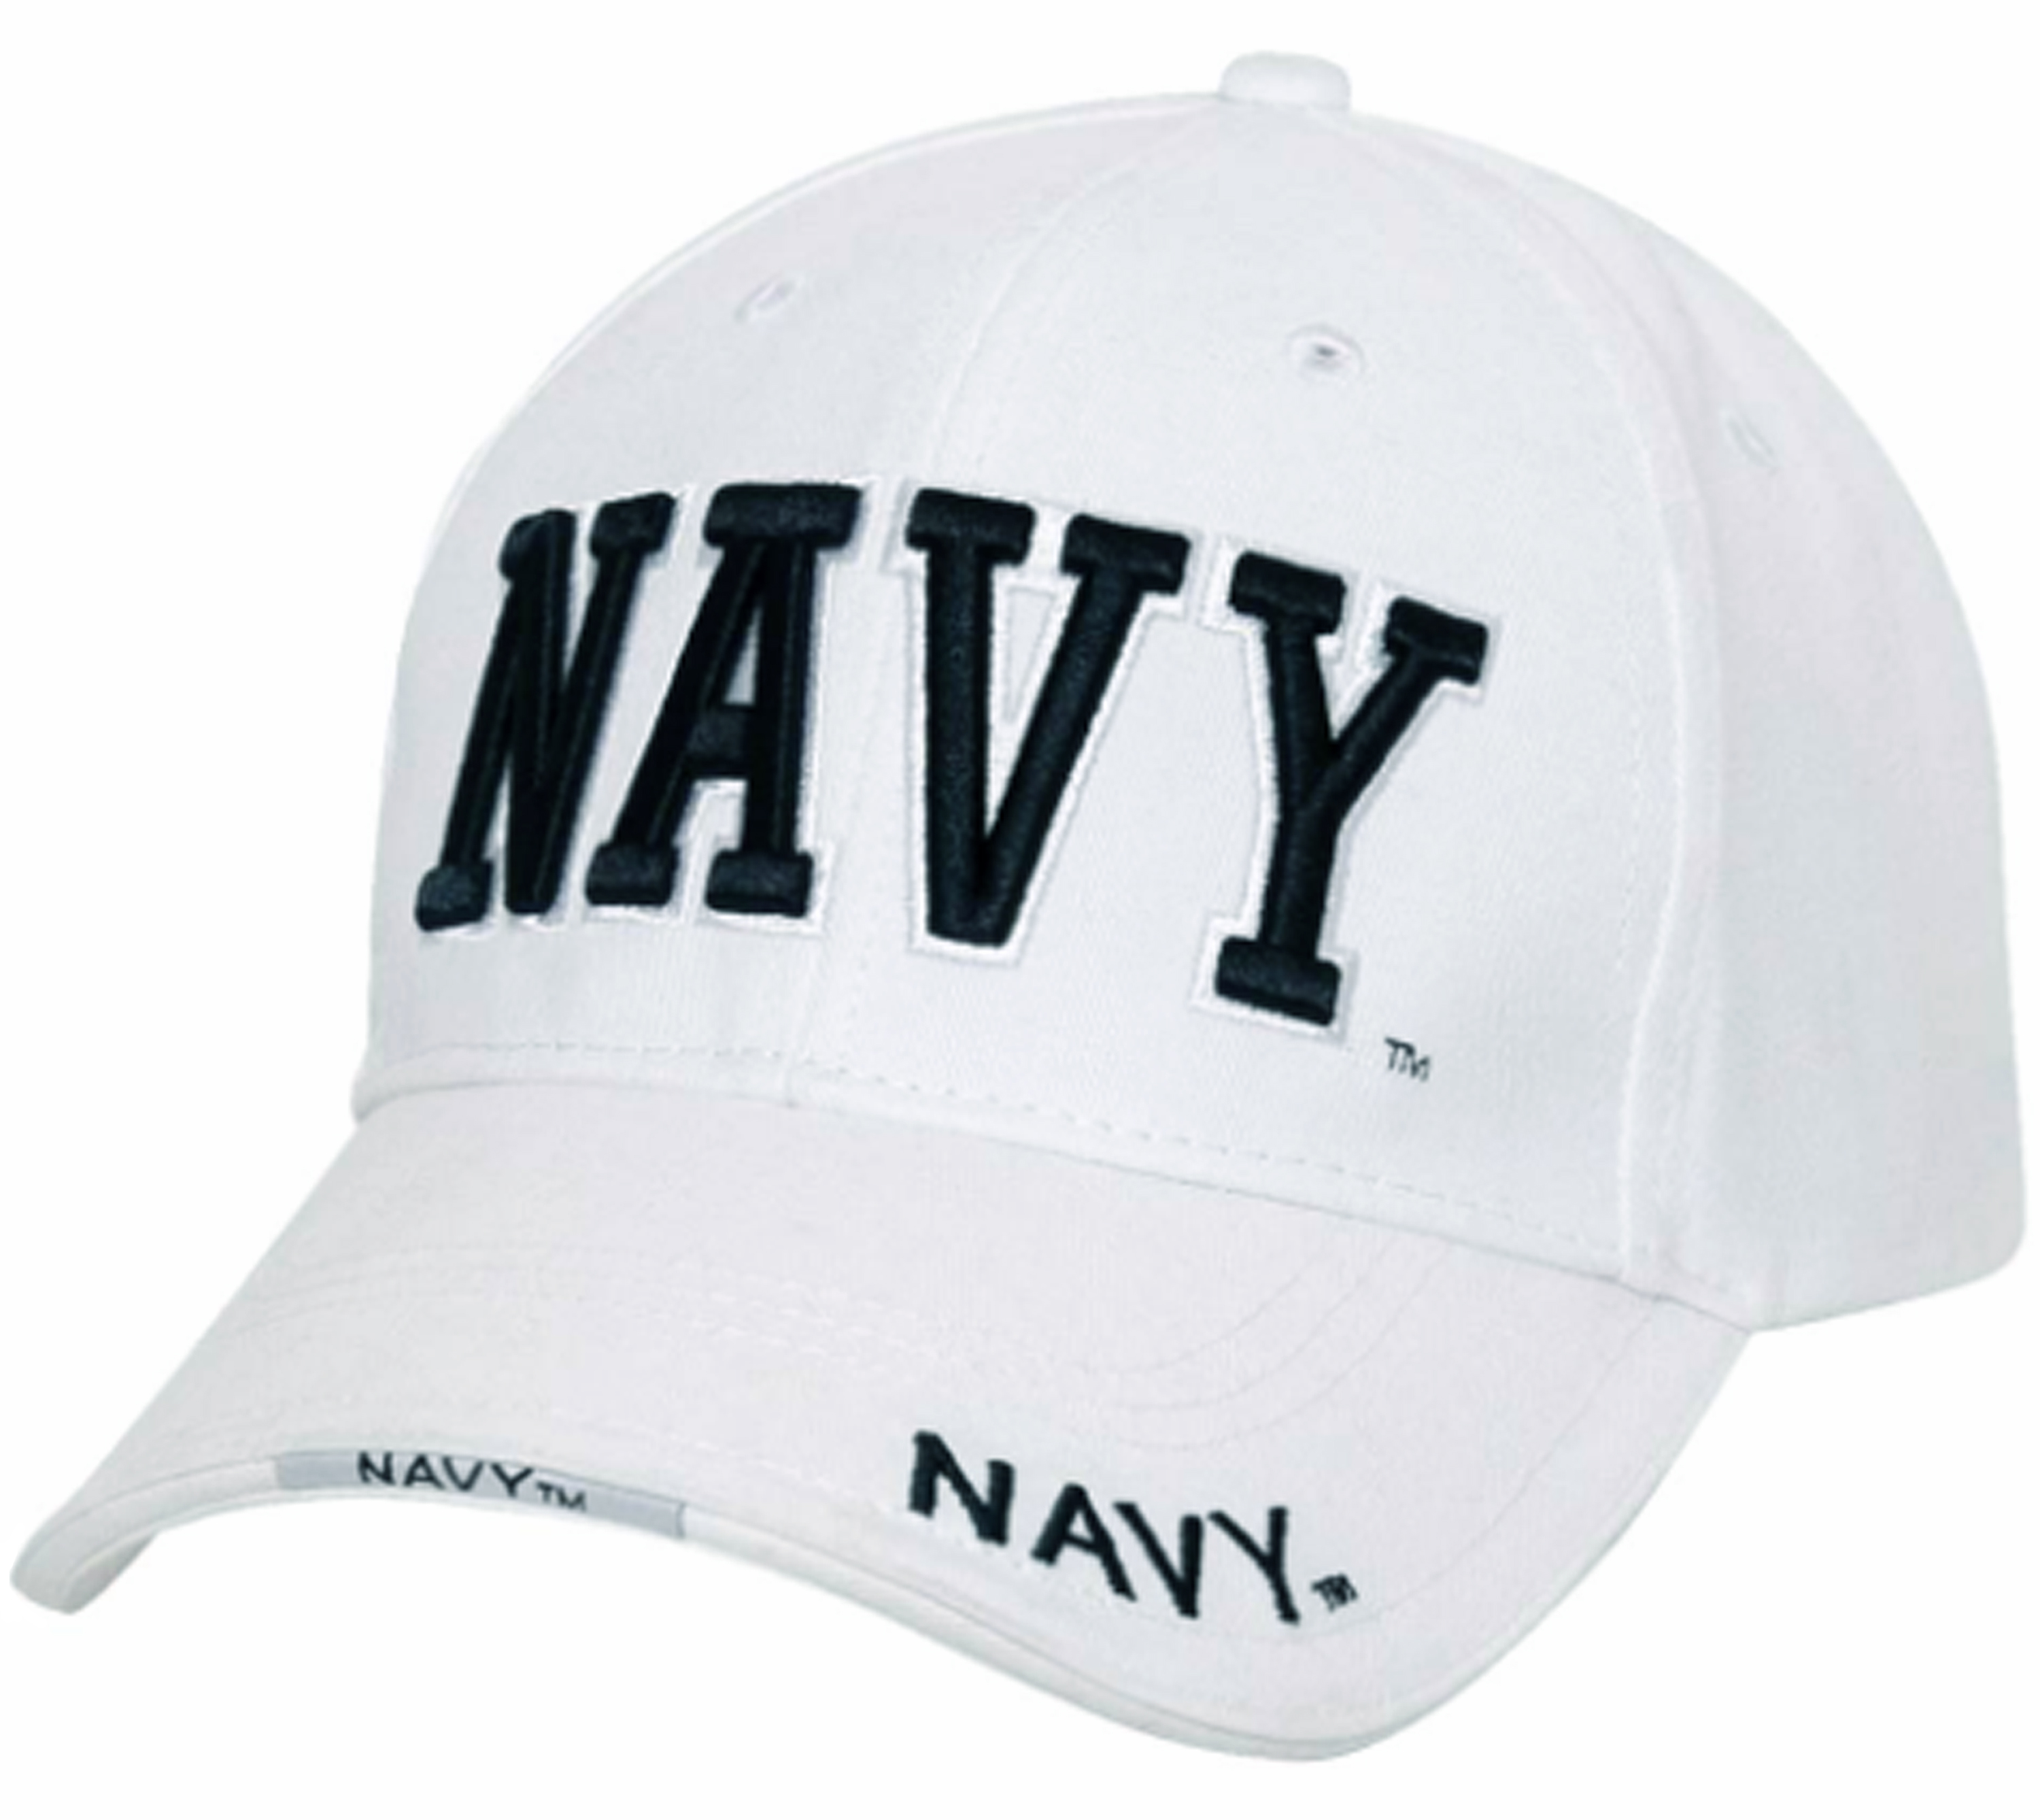 White Navy Veteran Baseball Cap Vet Embroidered Blue Letters, Men WomenOne Size Adjustable Relaxed Fit for Medium, Large, XL and Some XXL - image 1 of 5